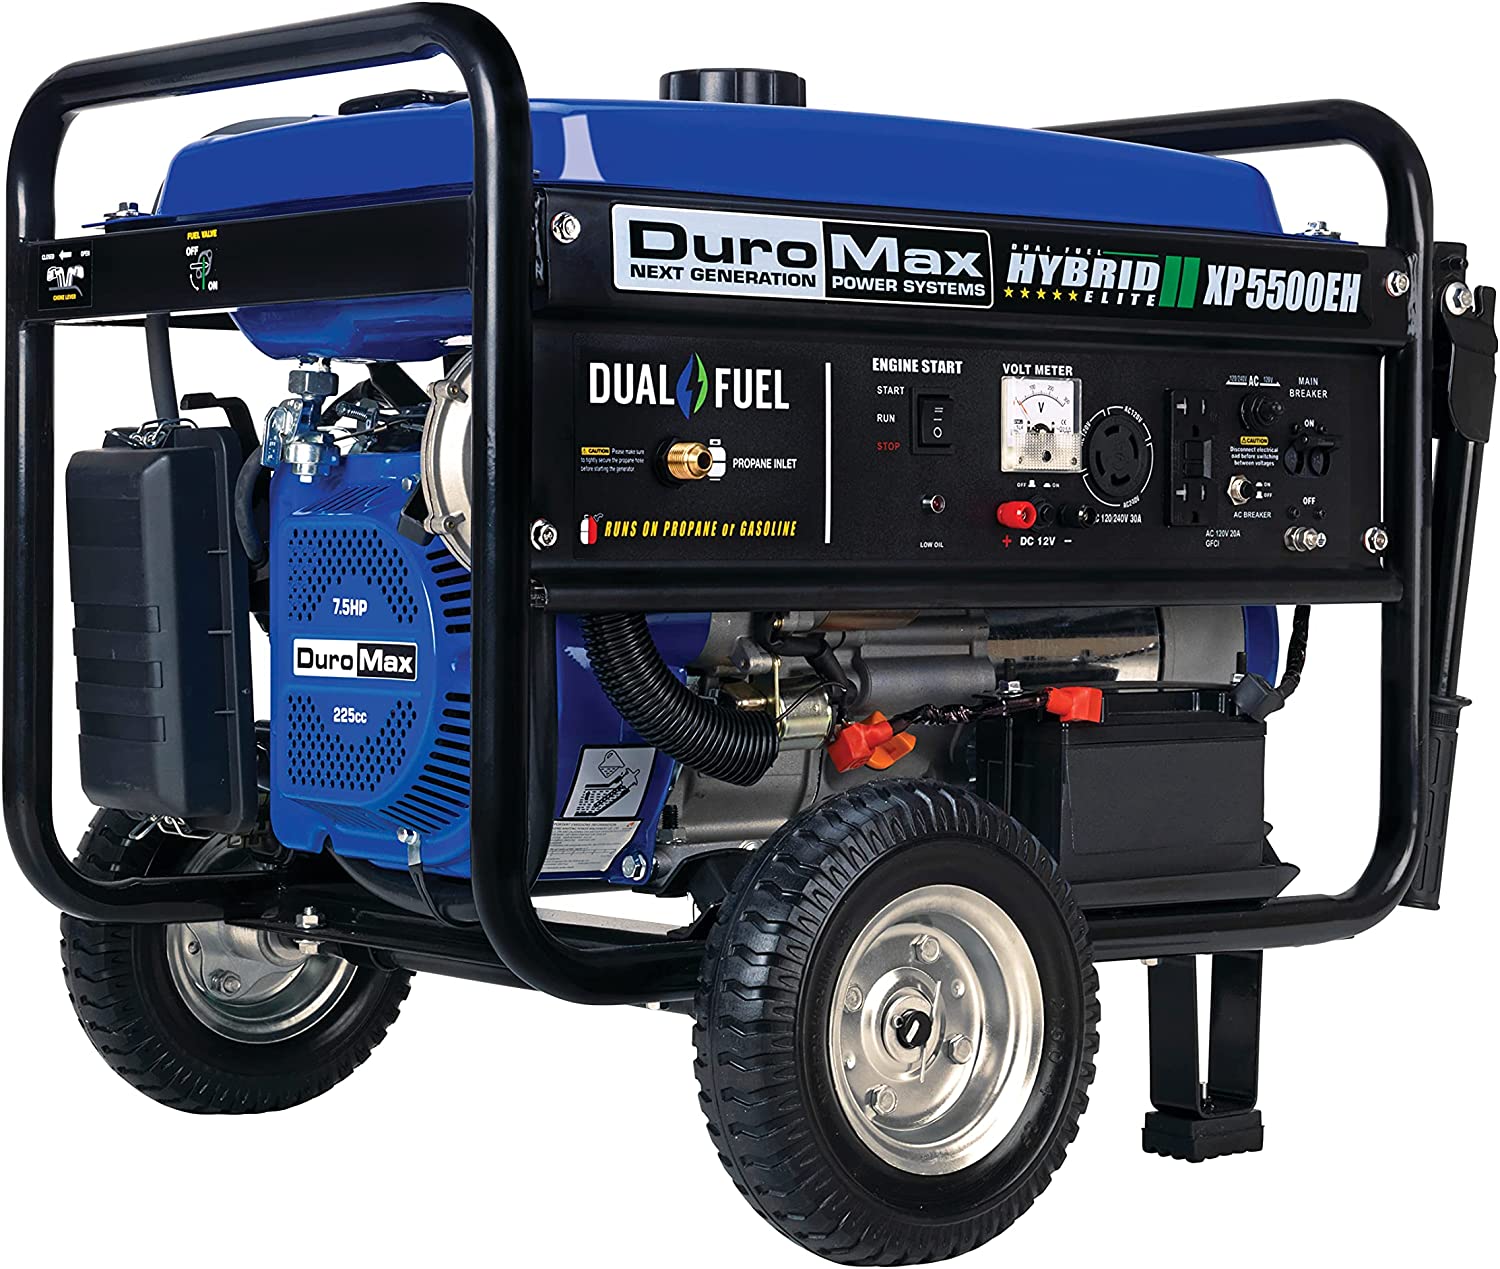 Electric Start-Camping & RV Ready, Dual Fuel Portable Generator